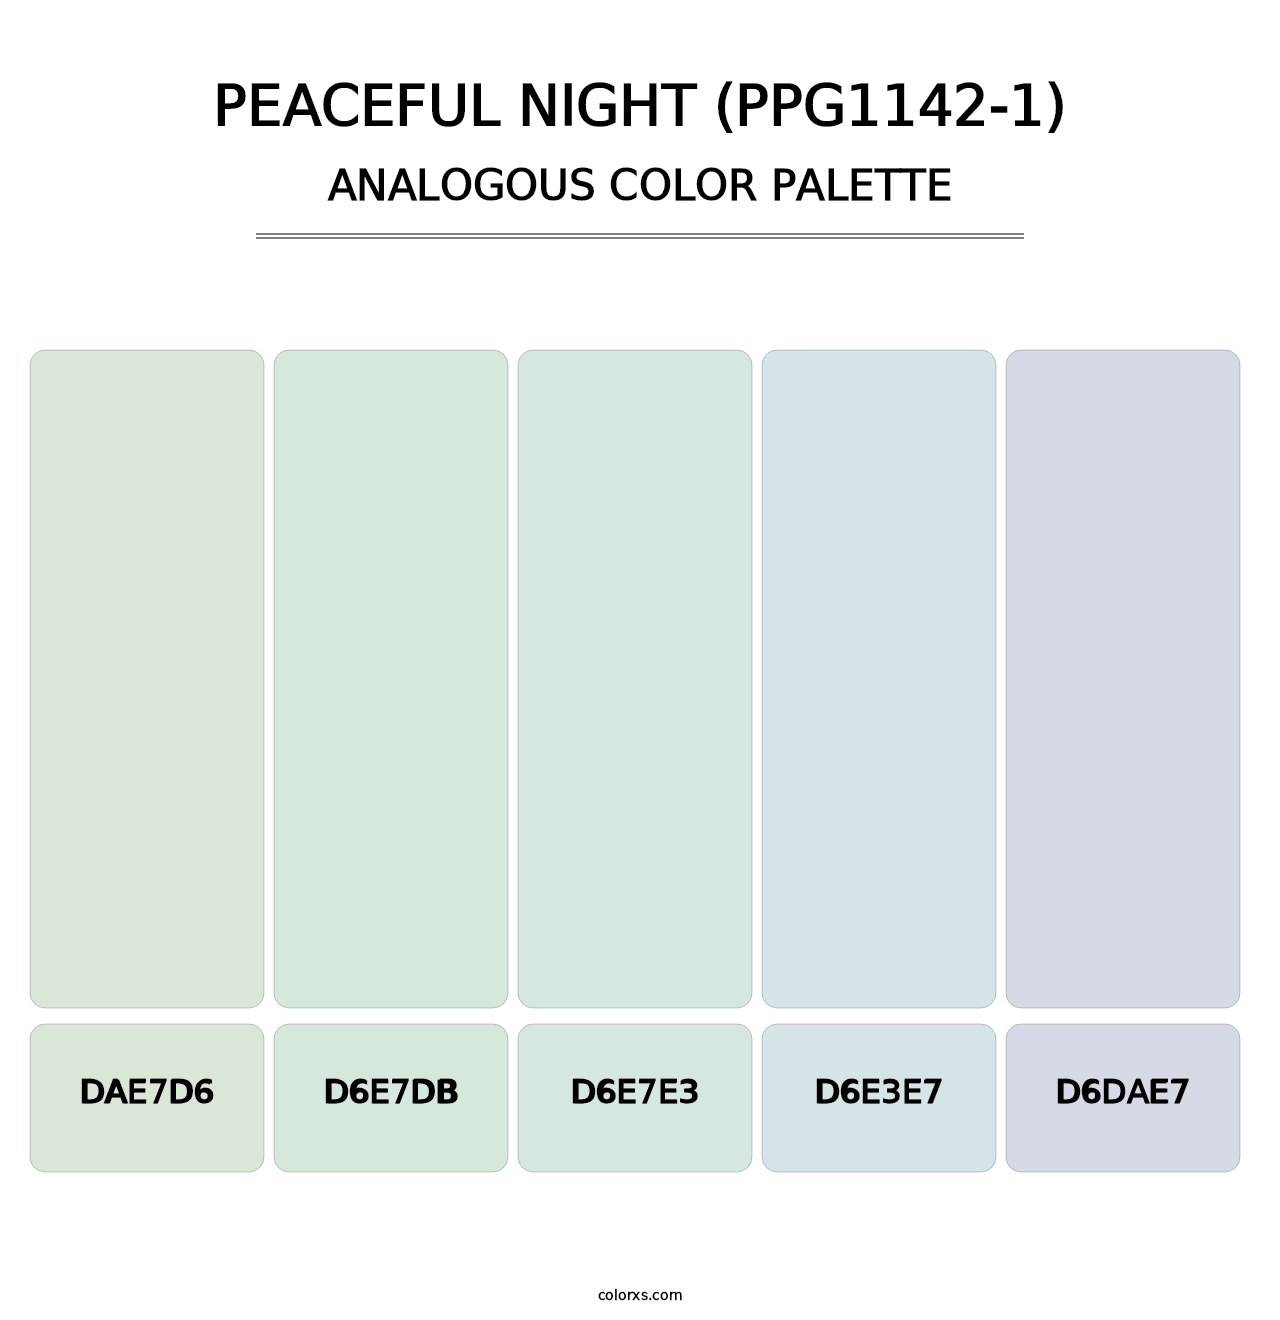 Peaceful Night (PPG1142-1) - Analogous Color Palette